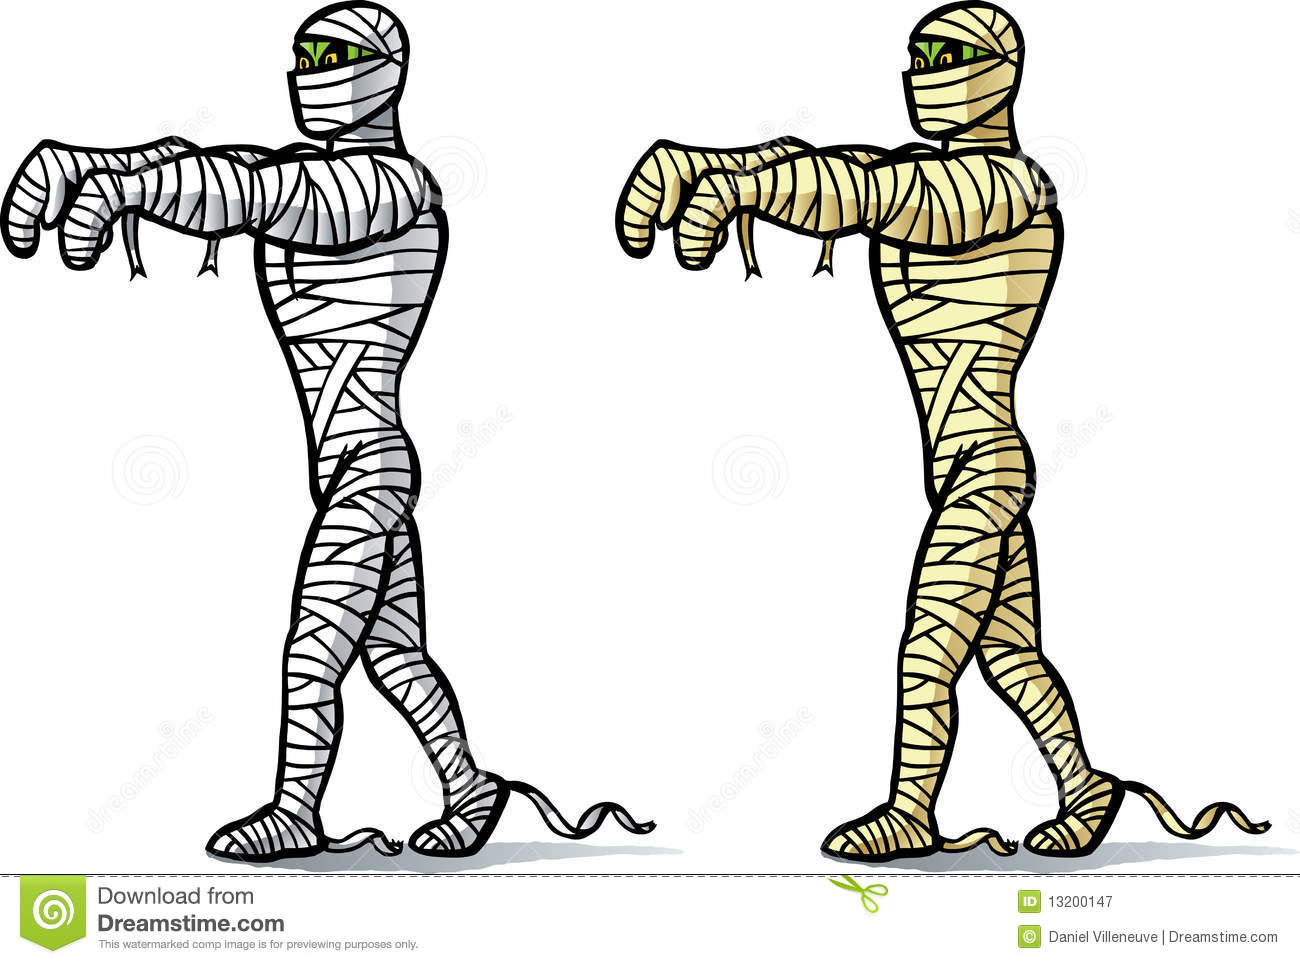 Two Differently Coloured Mummies Walking  Can Be Used For Anything